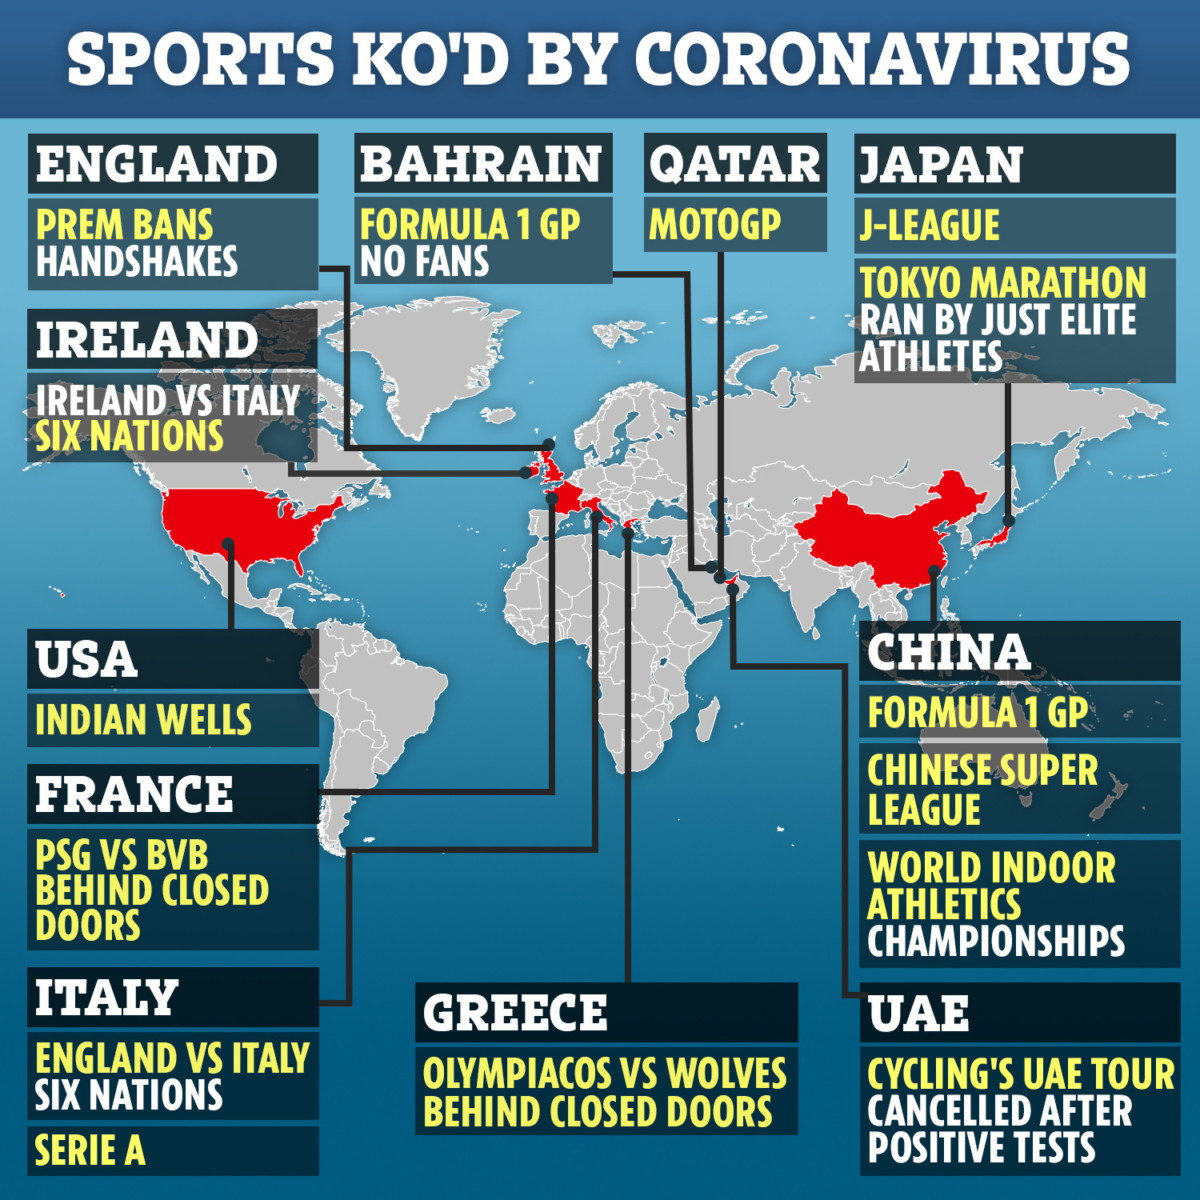 , Premier League matches and other sport events to allow fans in for now after Government crisis talks over coronavirus